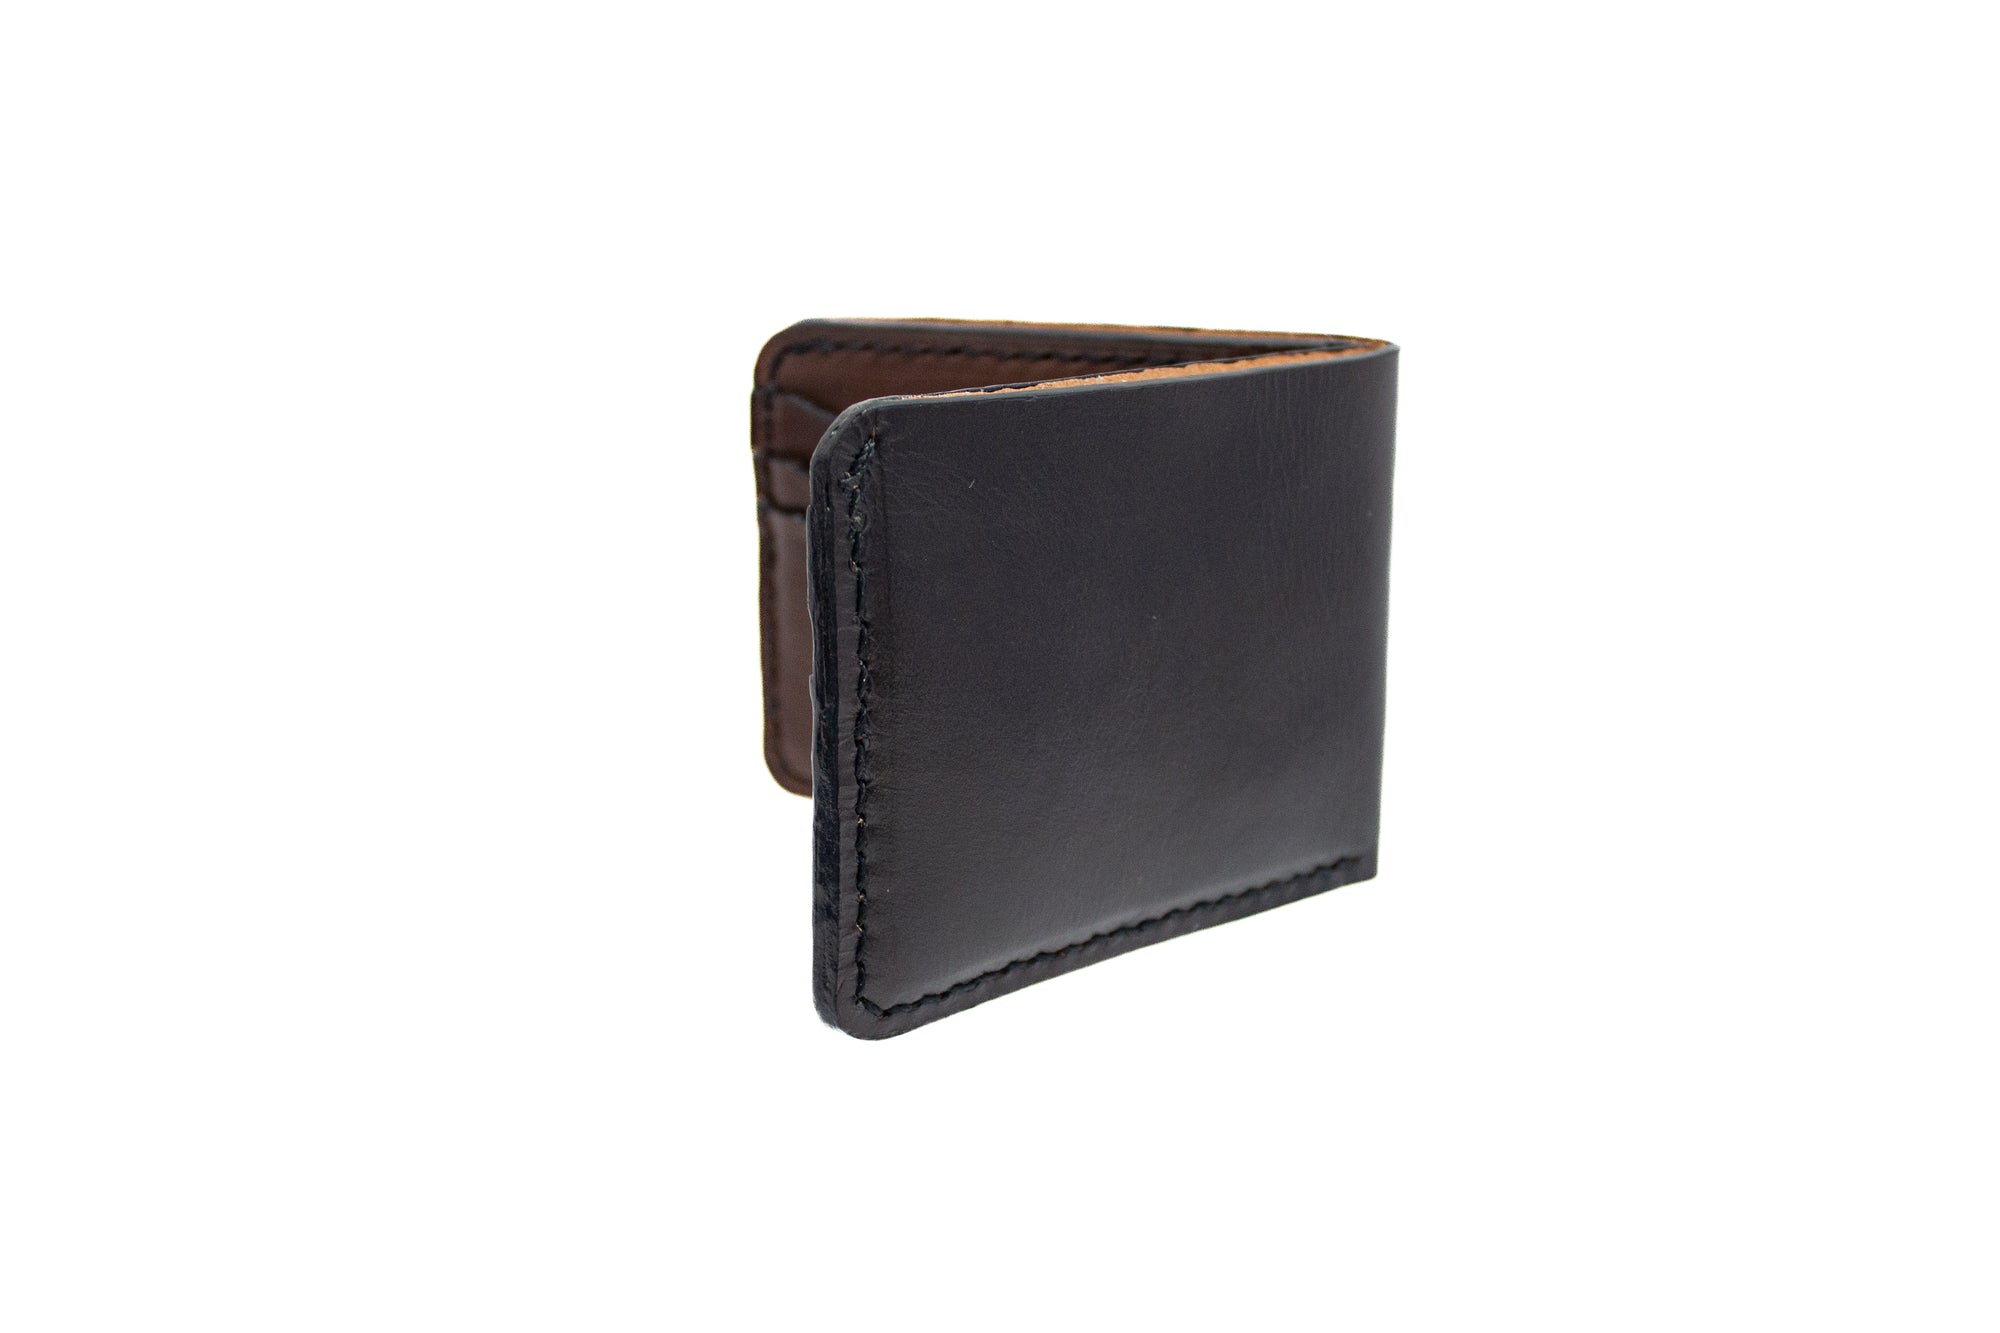 9 Pocket Handcrafted Leather Wallet